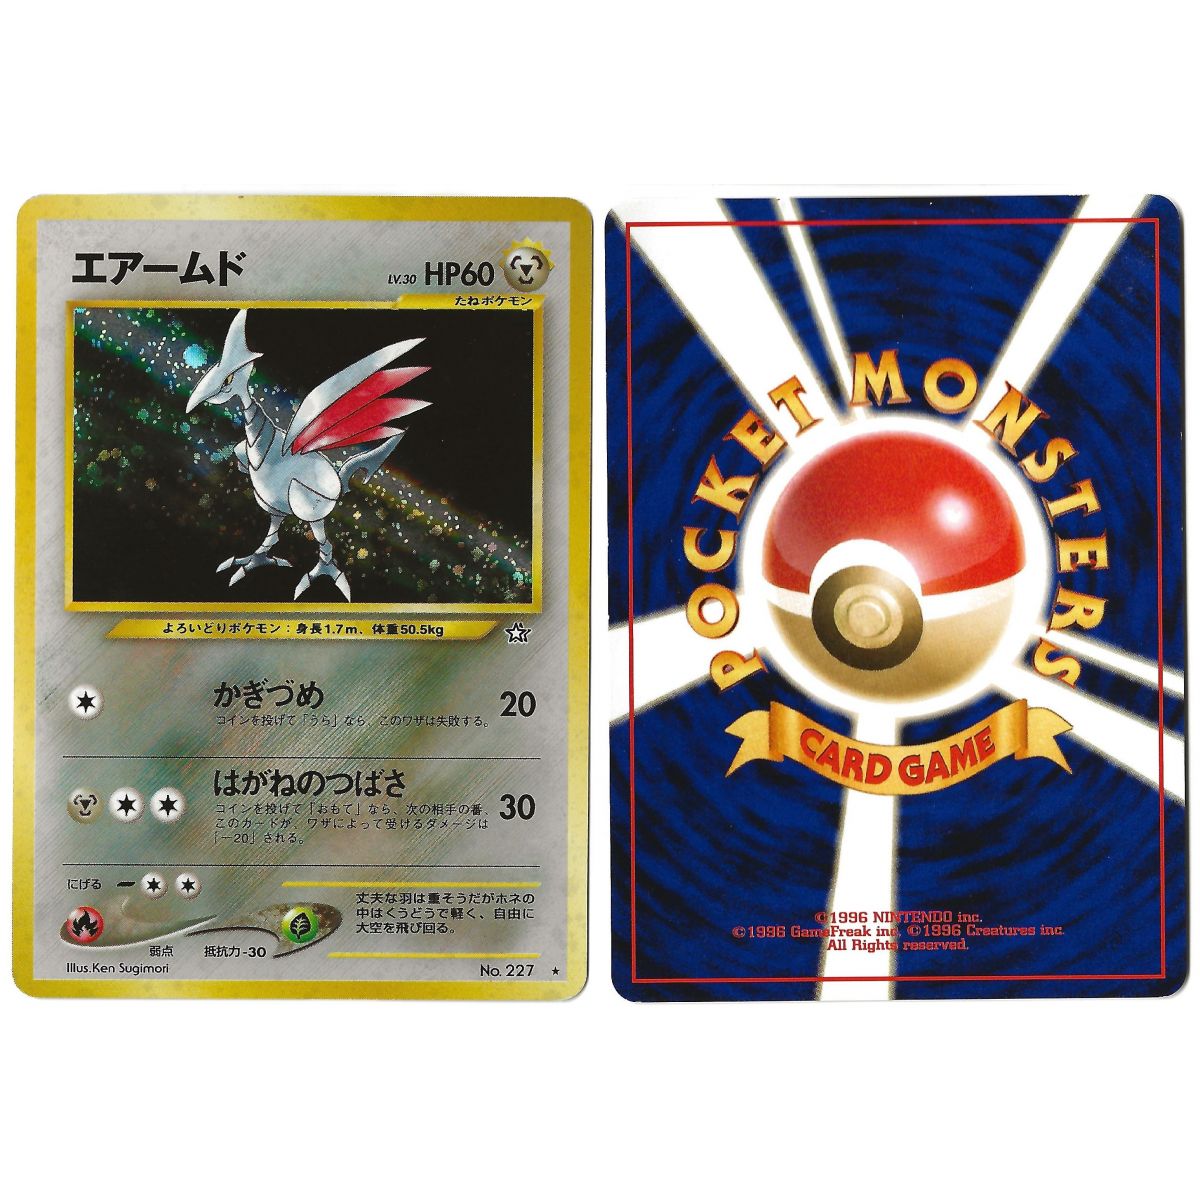 Skarmory (1) Nr. 227 Gold, Silber, in eine neue Welt ... N1 Holo Unlimited Japanese View Scan